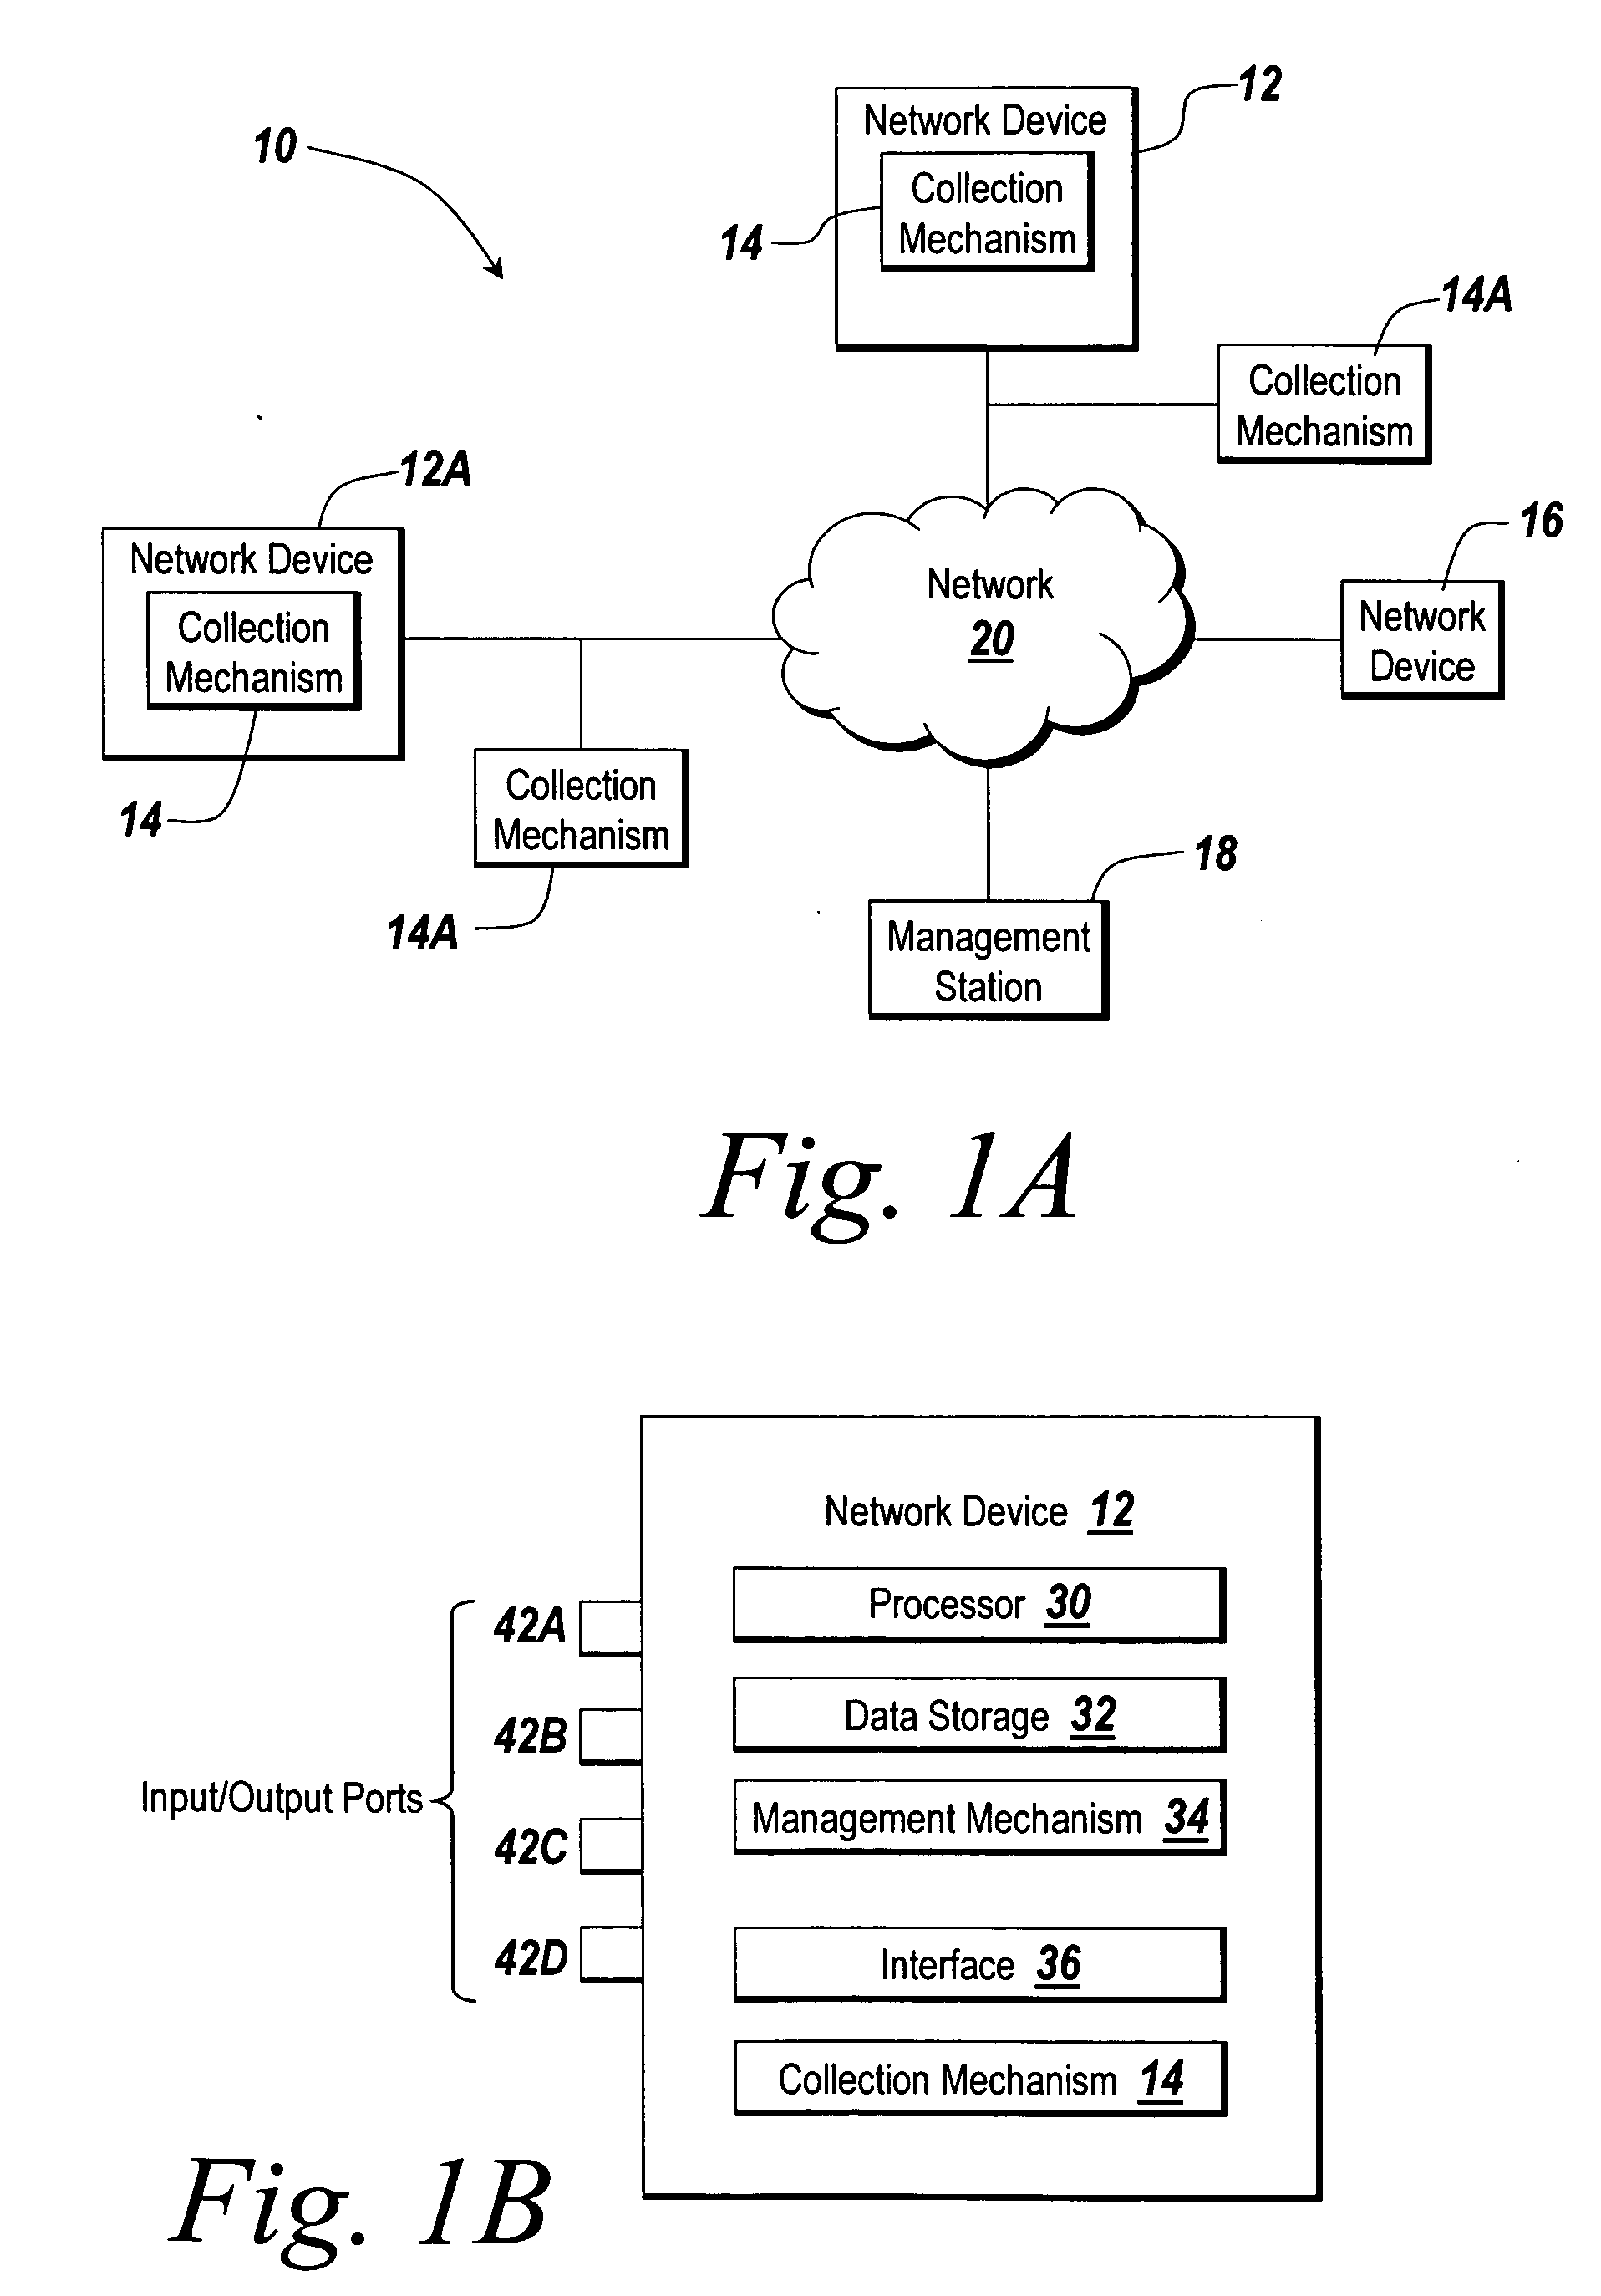 System and methods for re-evaluating historical service conditions after correcting or exempting causal events